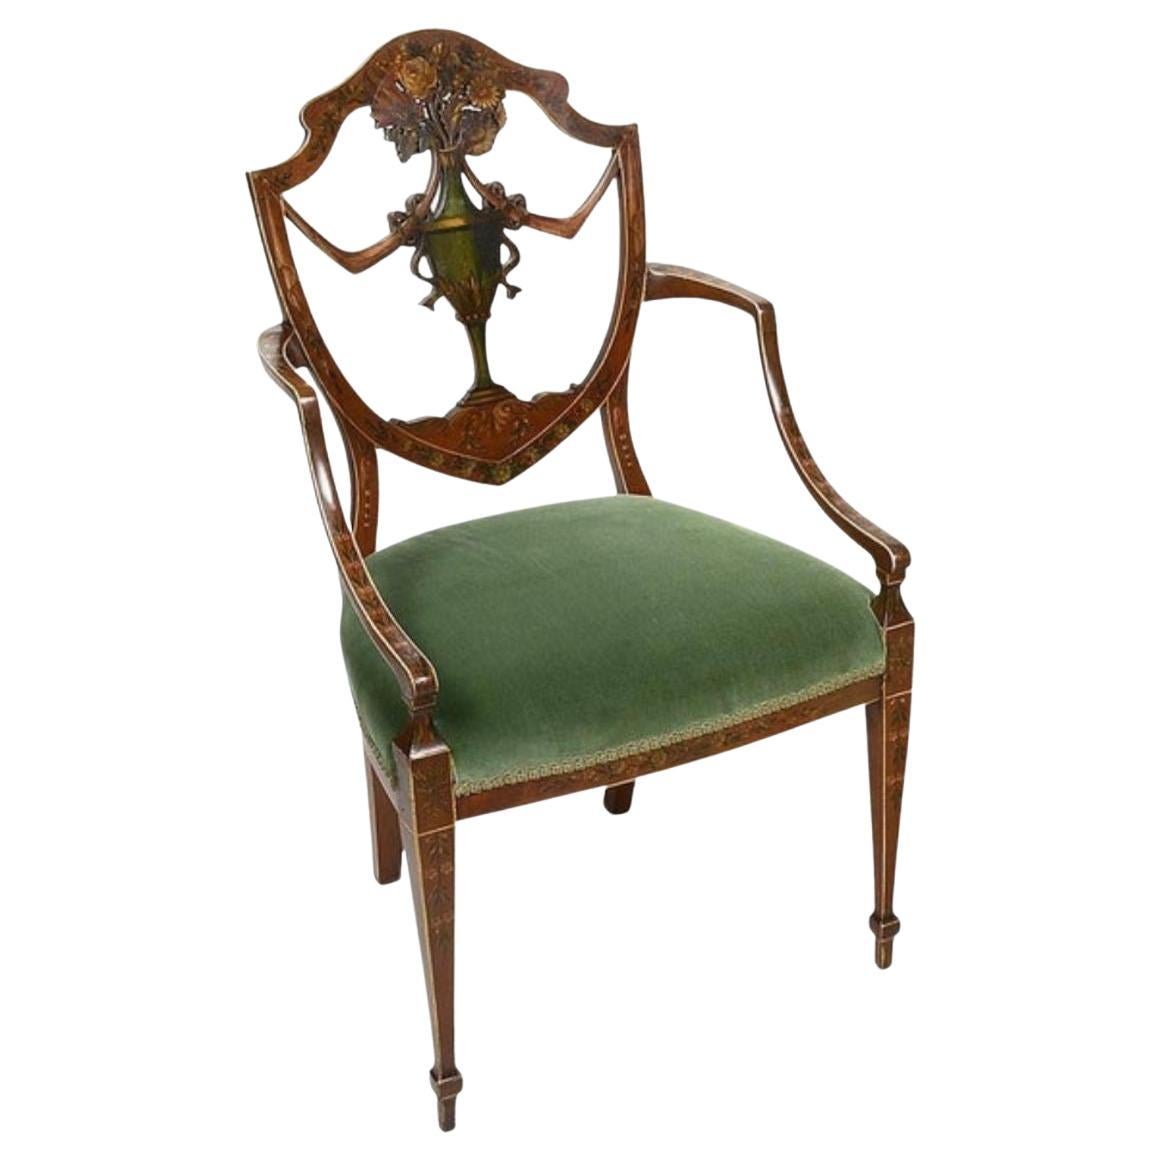 A Sheraton revival Satinwood, hand painted arm chair, circa 1900